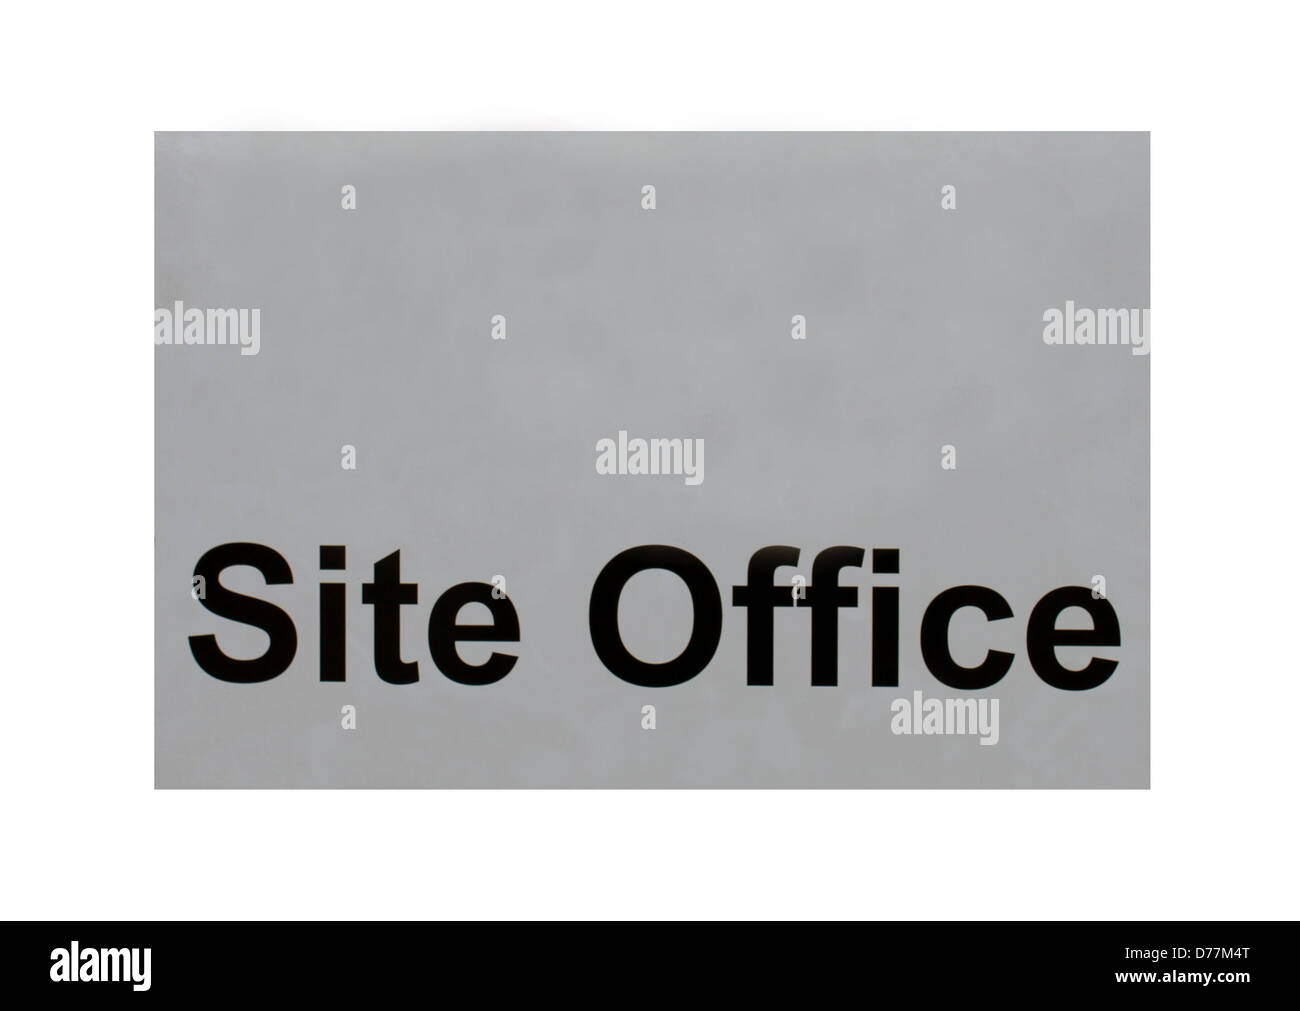 Construction site office sign isolated on white background. Stock Photo